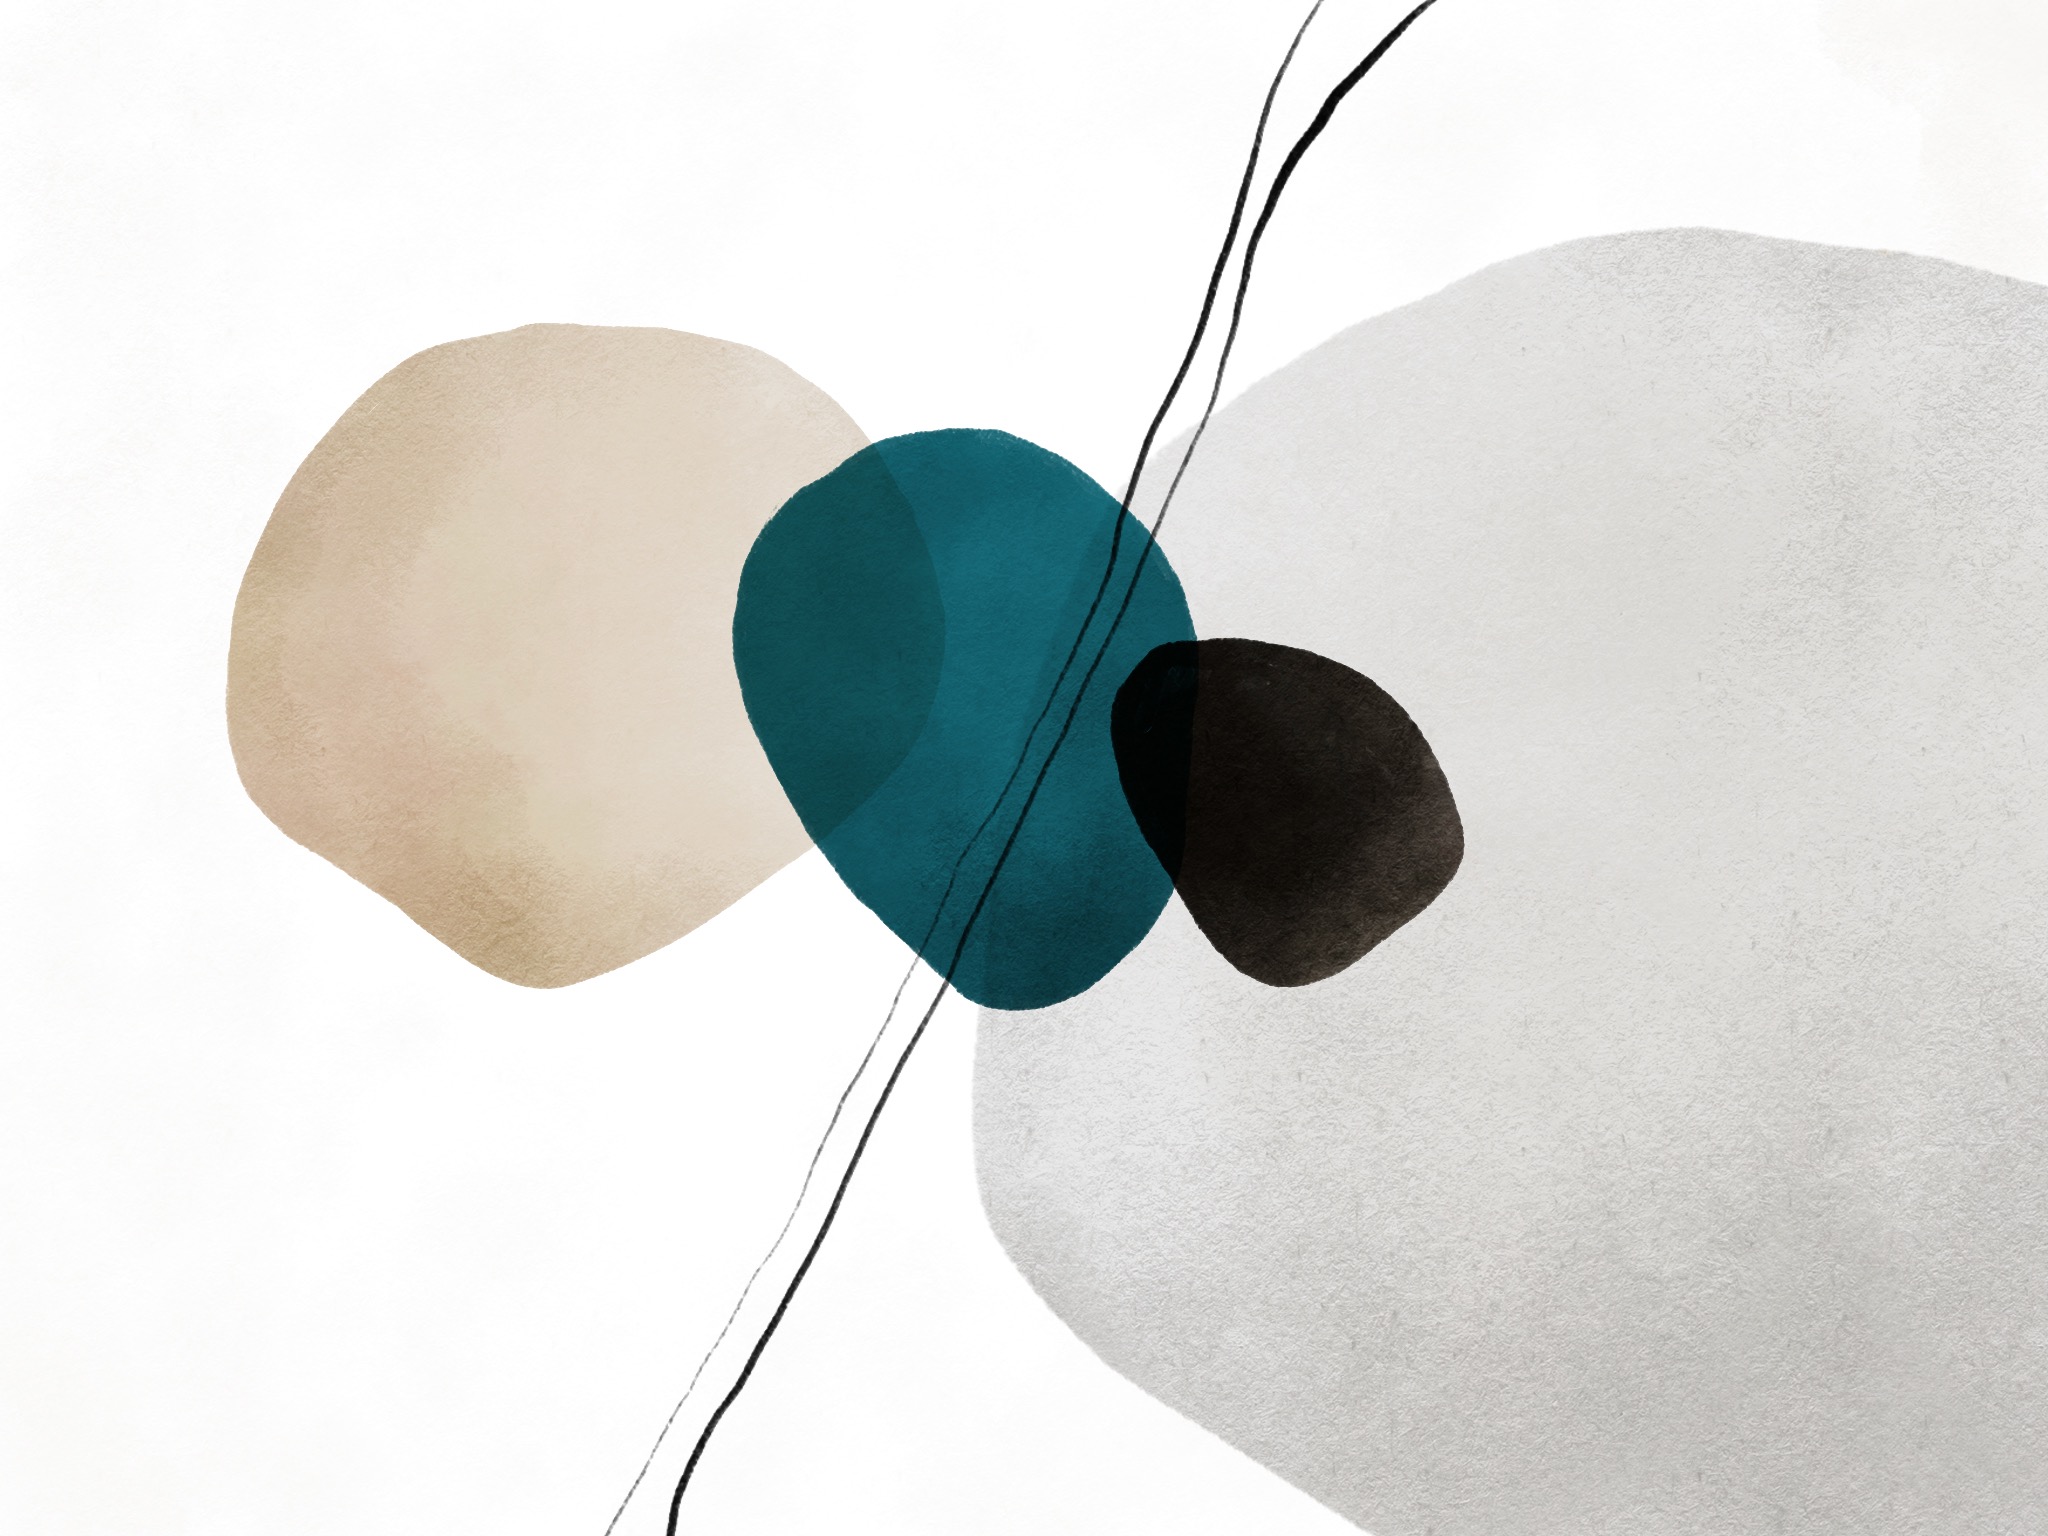 Joseph Kiely abstract art with rounded design shapes using teal and light beige colors